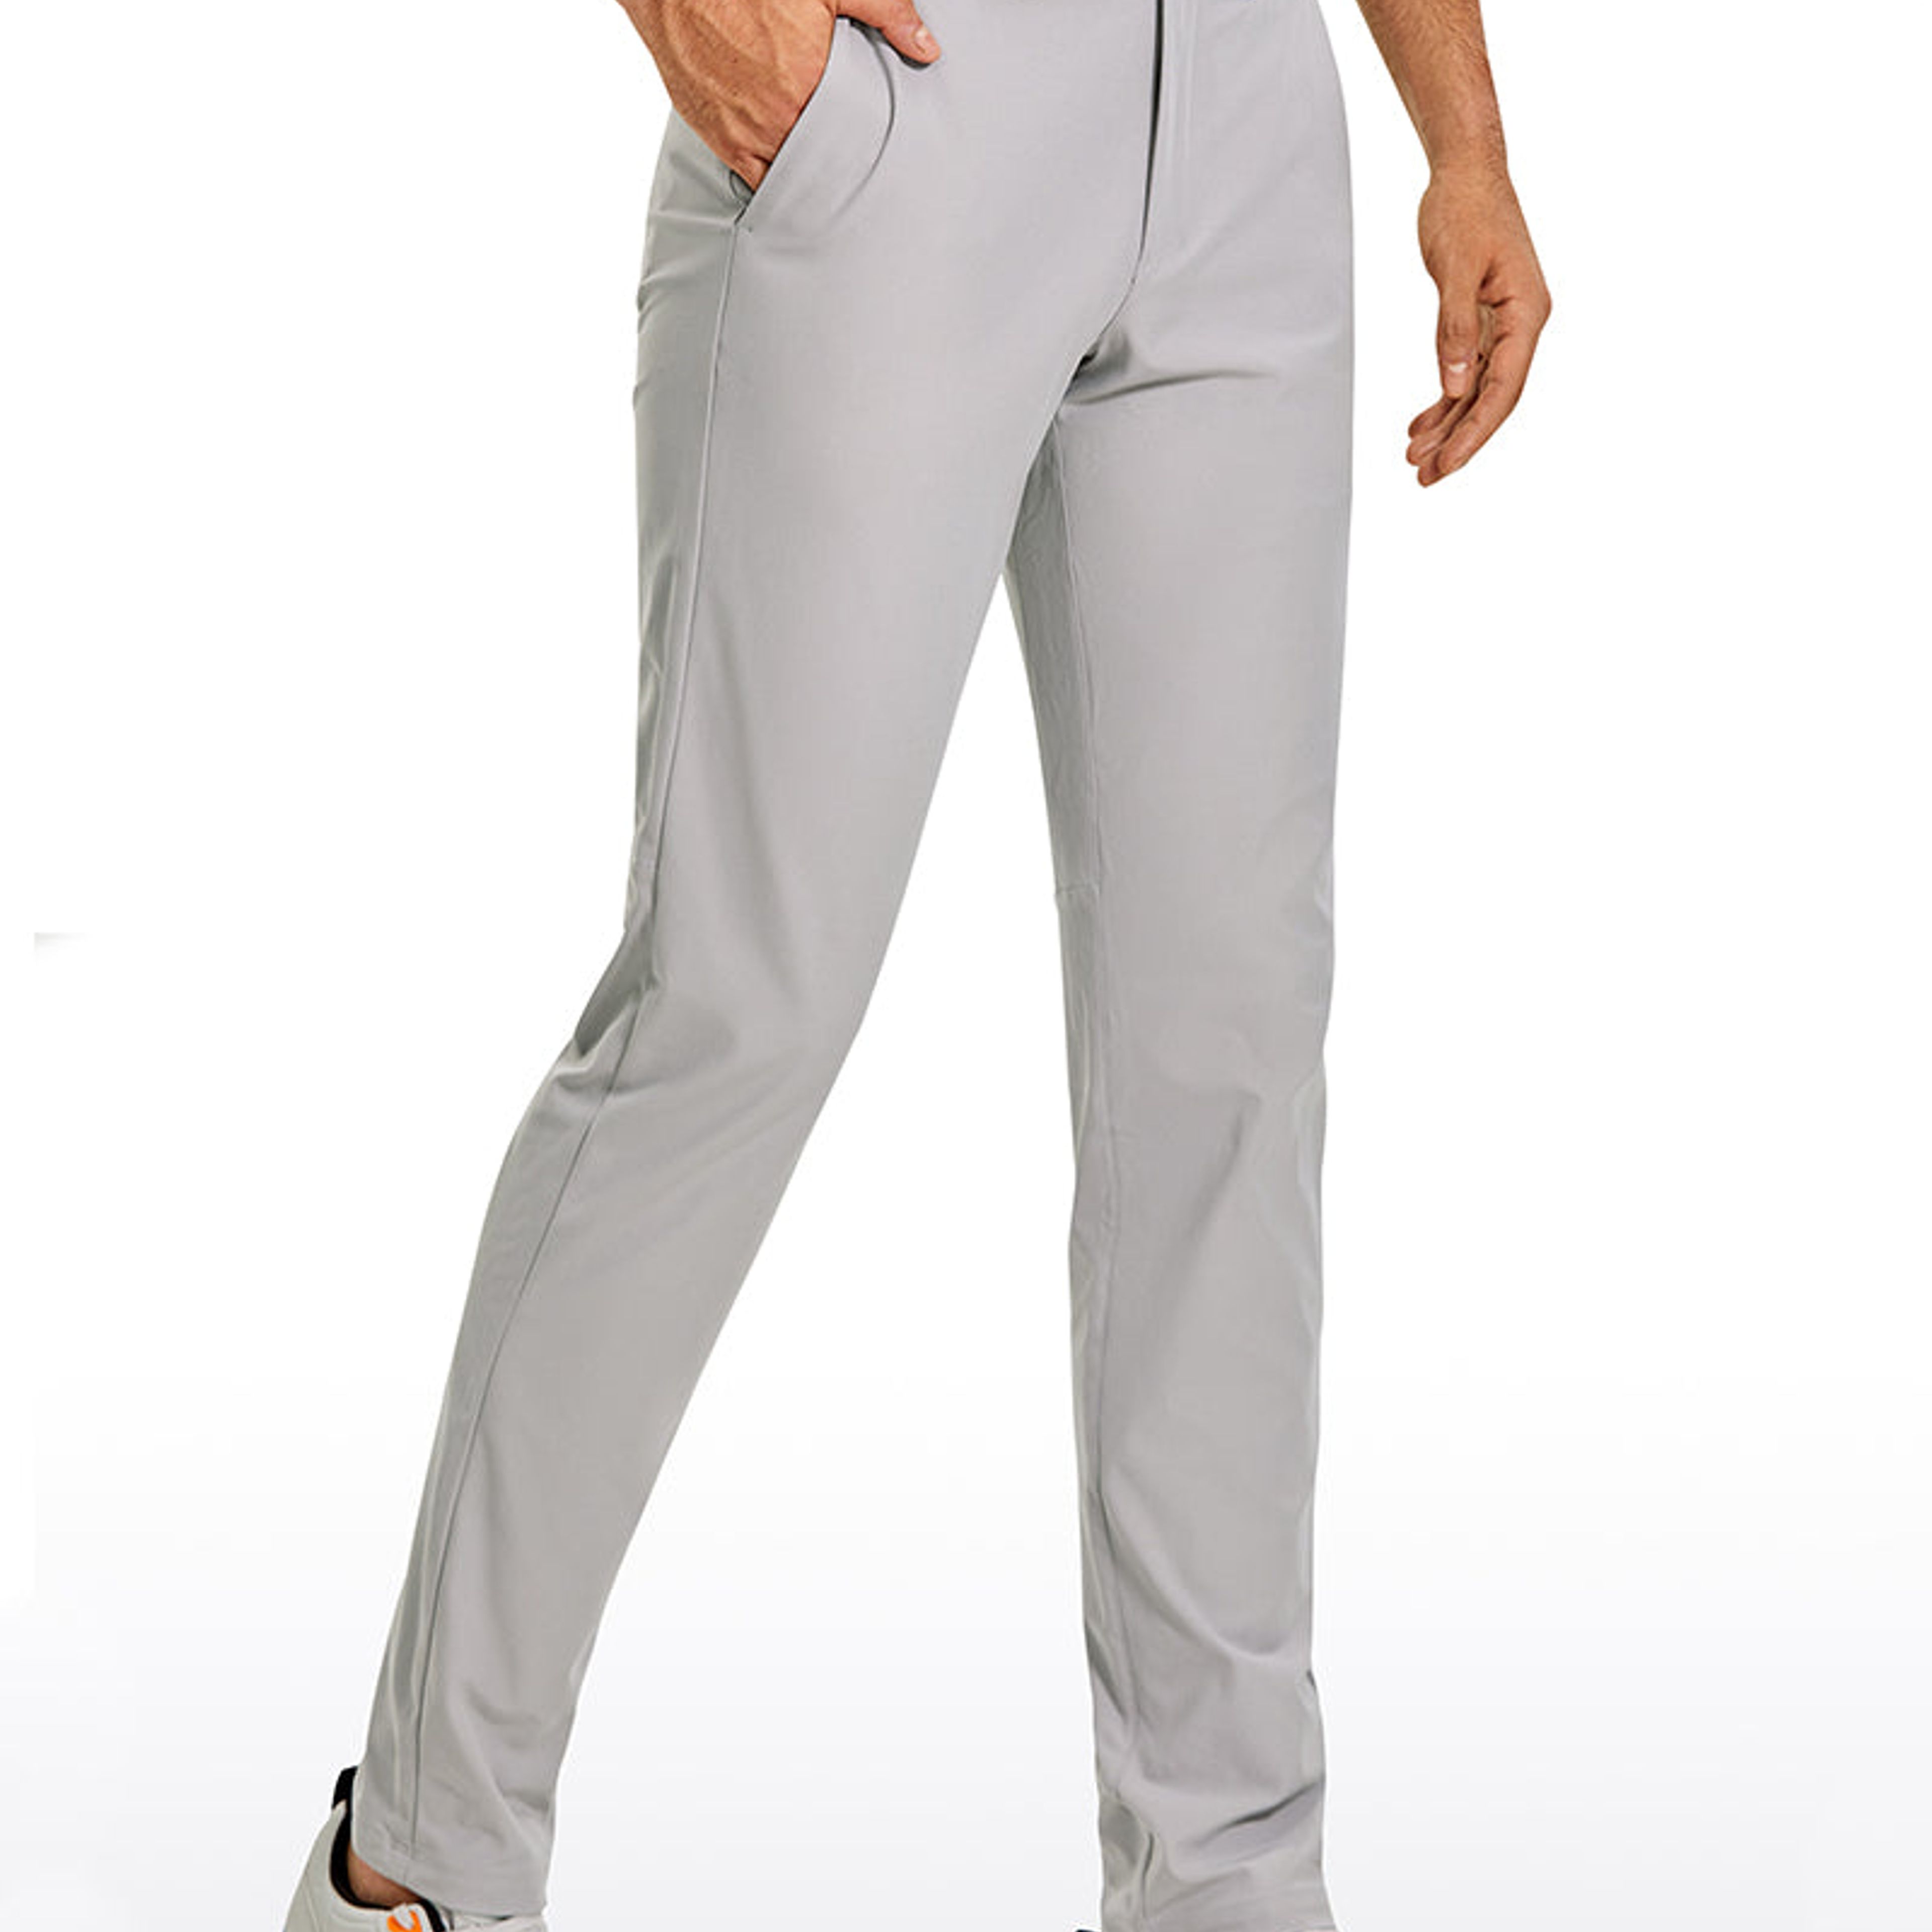  CRZ YOGA Womens Modern/Fitted